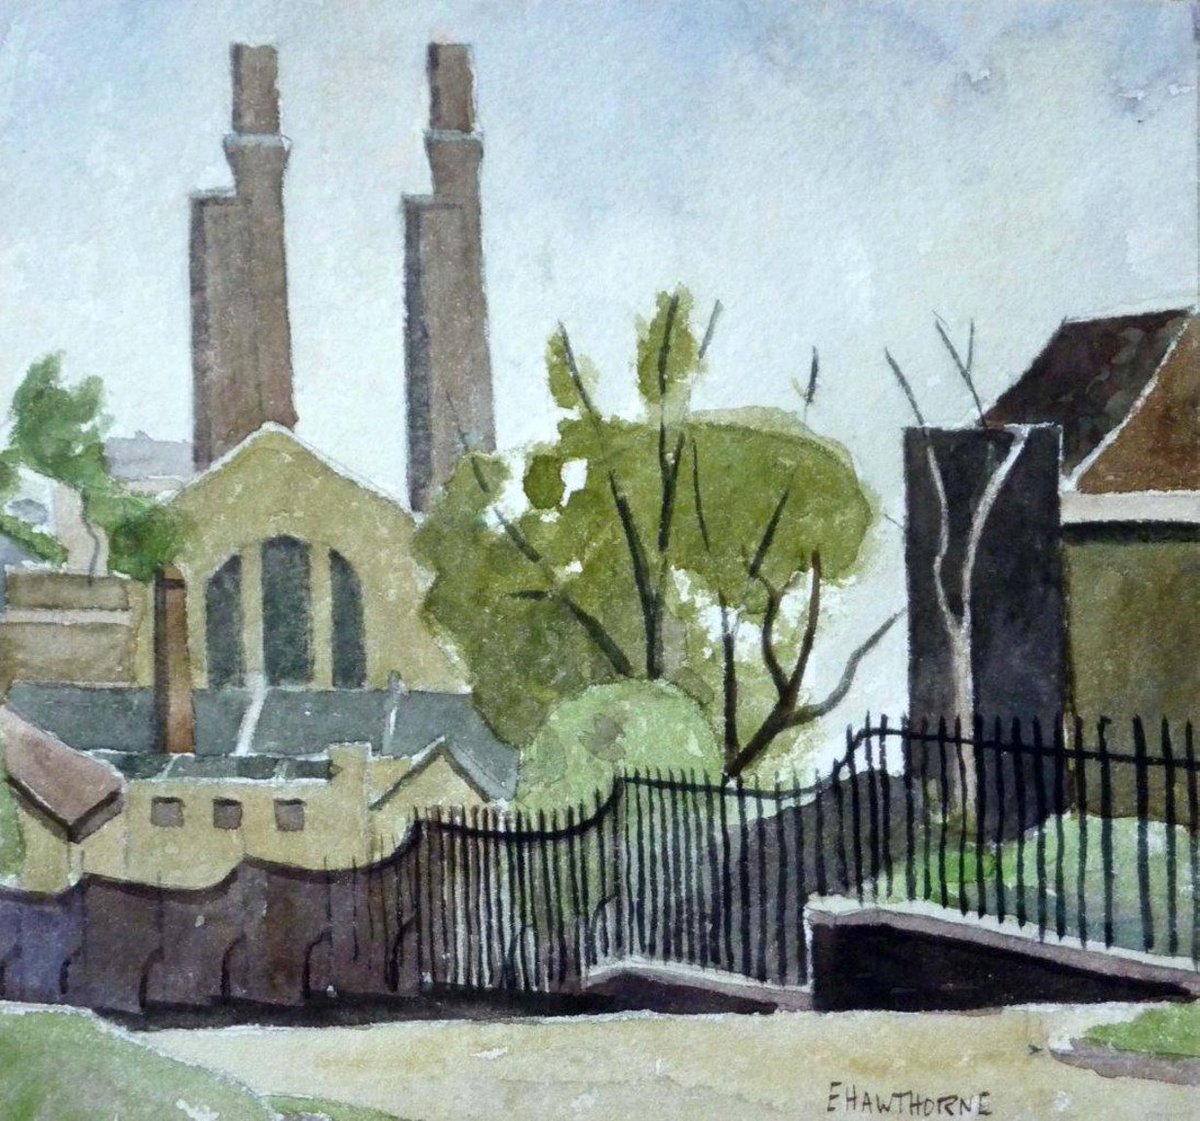 Good evening, Jo @sevenpitches & thank you, somewhat belatedly on my part, I'm afraid. This isn't quite in the park, I'm afraid but, if you know the area well, I expect you'll recognise 'Green Power Station' here depicted by Elwin Hawthorne from c.1935. #ElwinHawthorne #Greenwich